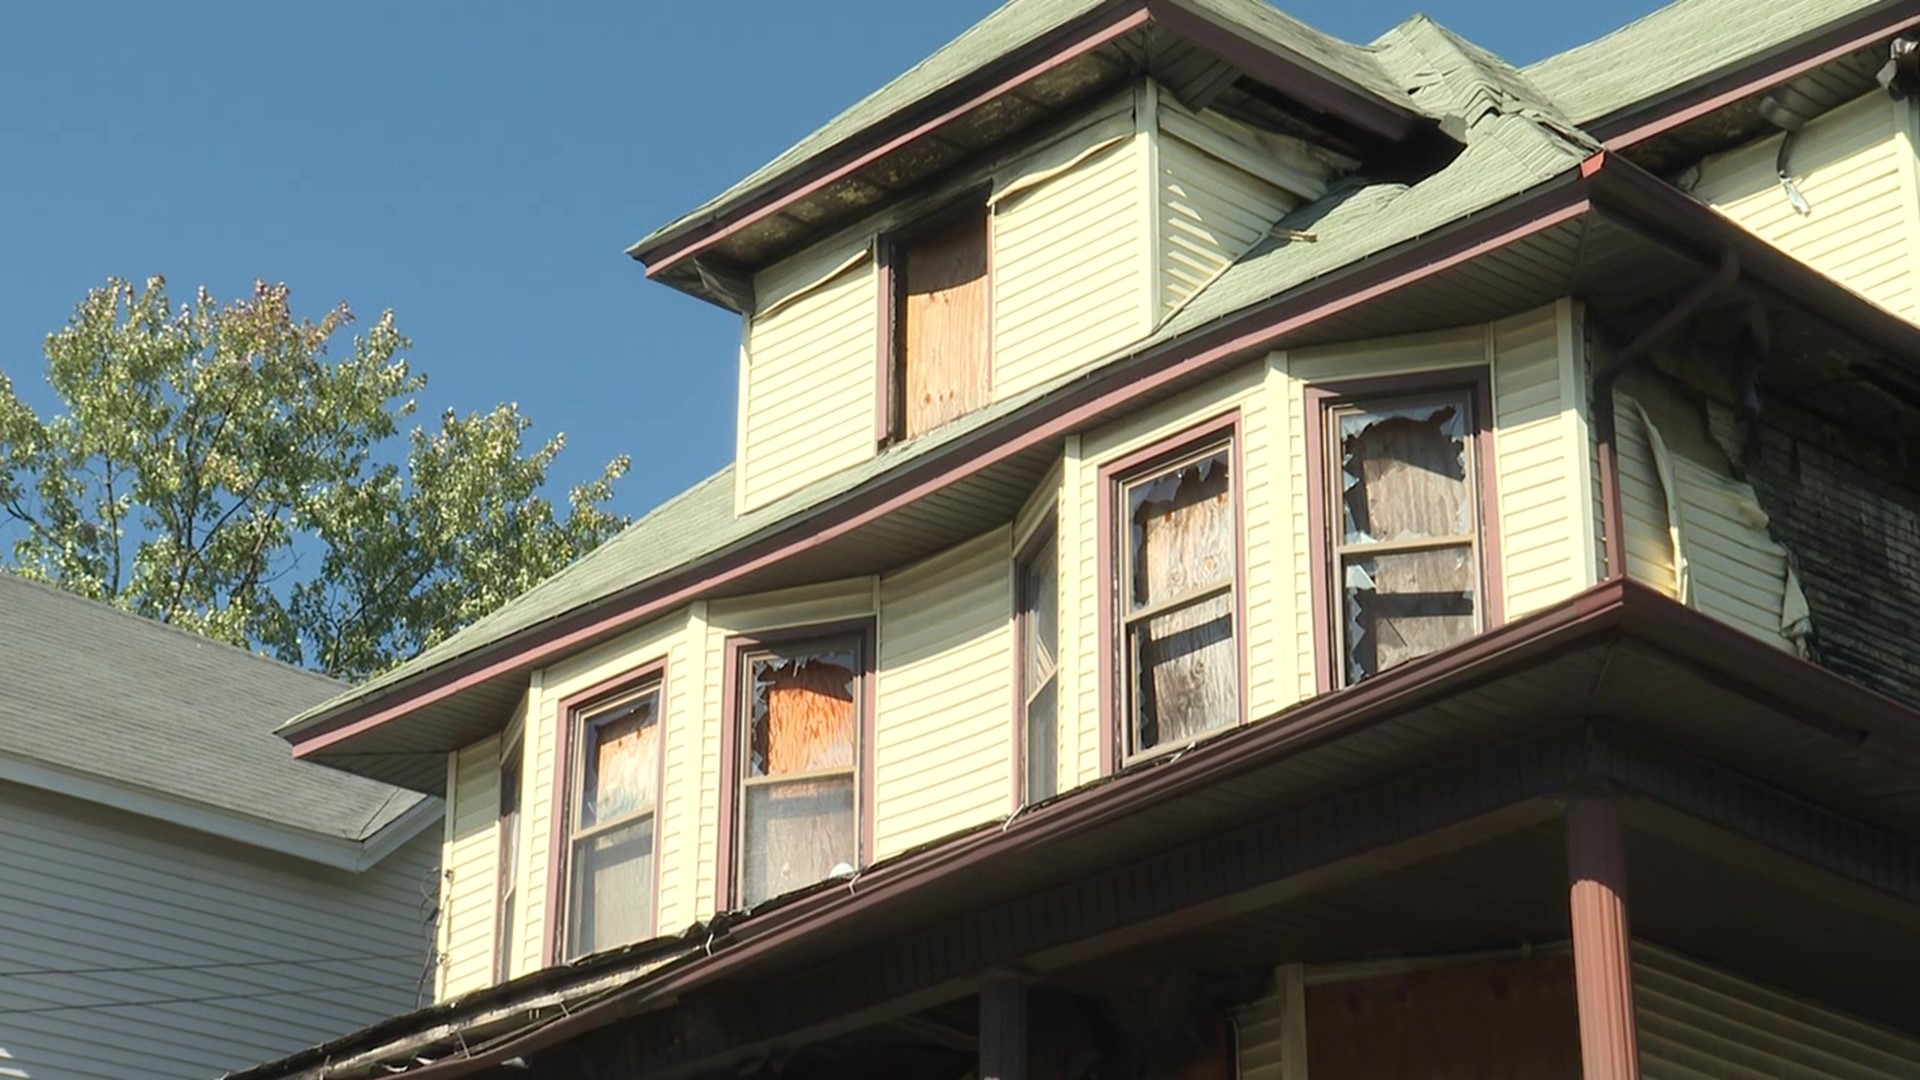 Communities will receive nearly $1.5 million to take down dilapidated buildings.